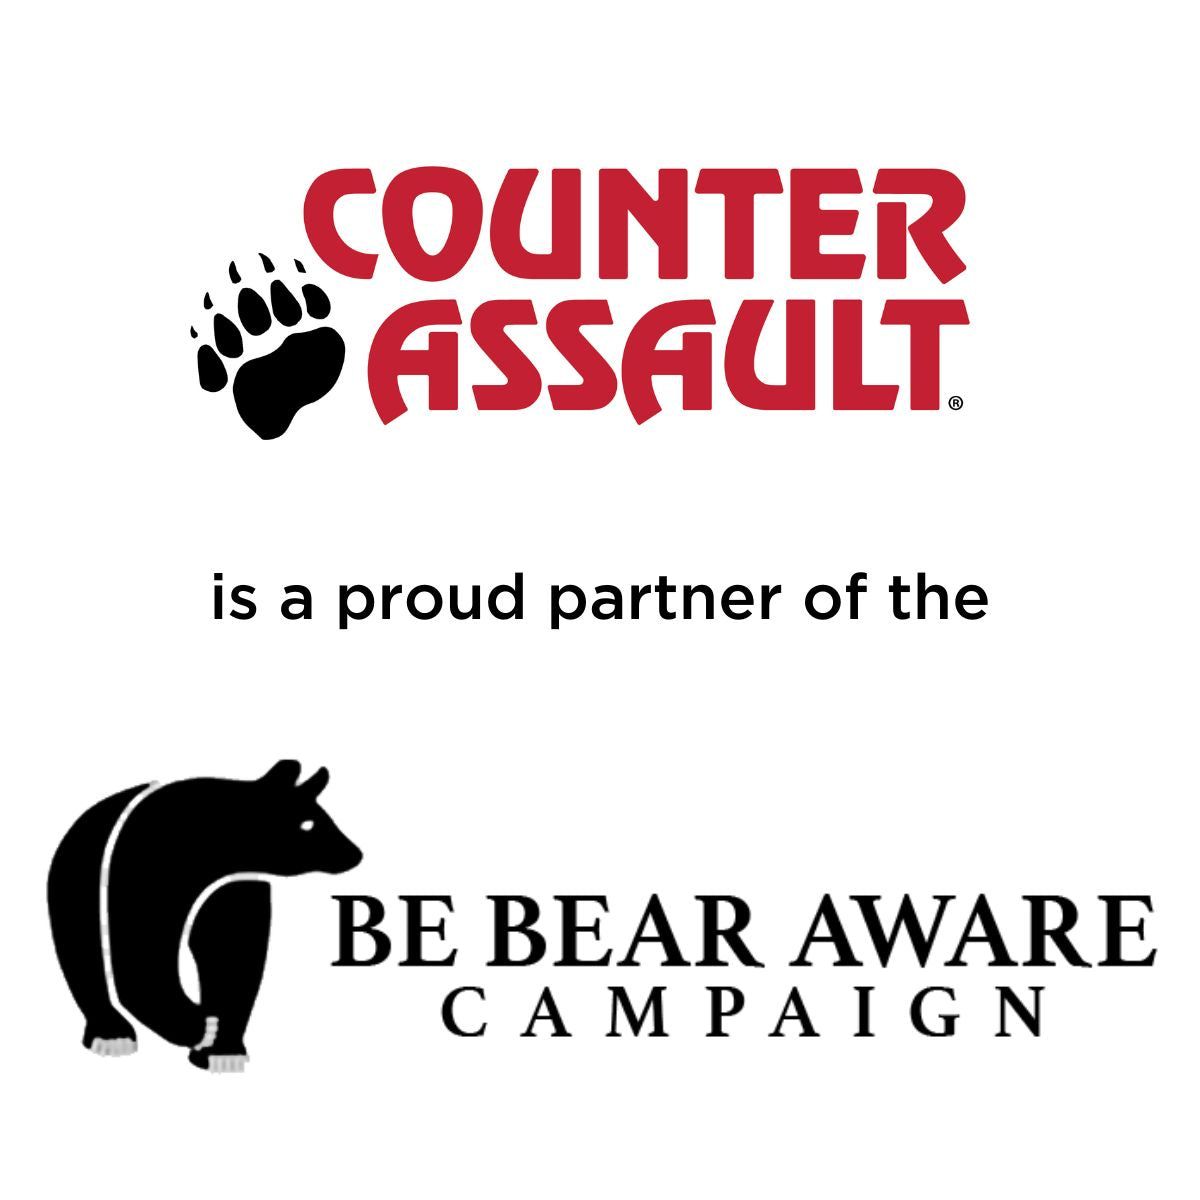 Counter Assault is a proud partner of the Be Bear Aware Campaign